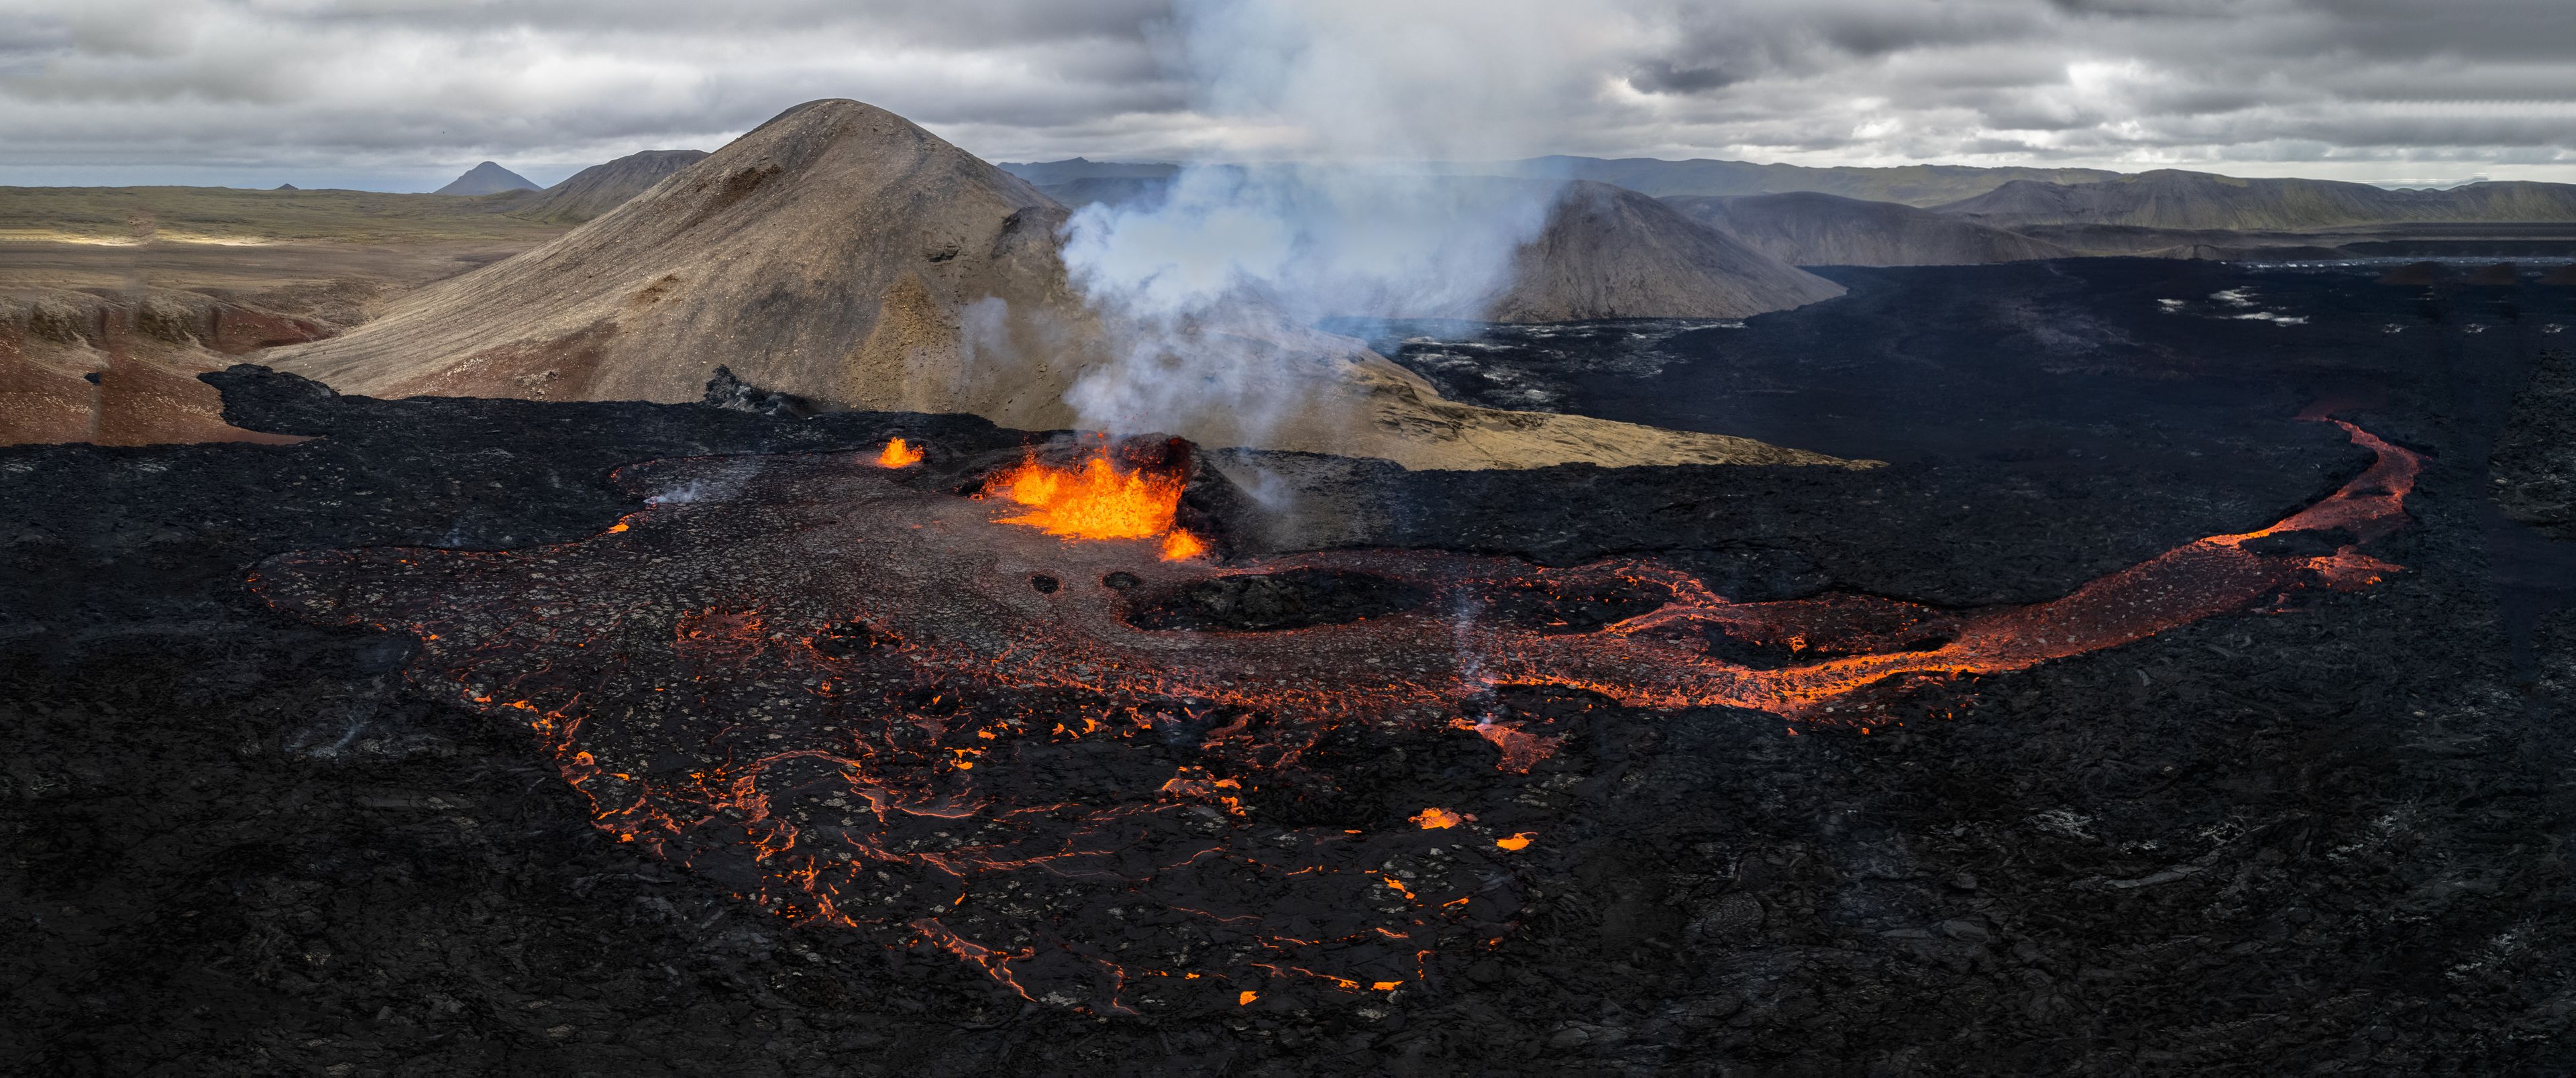 A view of famous volcanoes, Meradalir valley with volcanic activity in the background